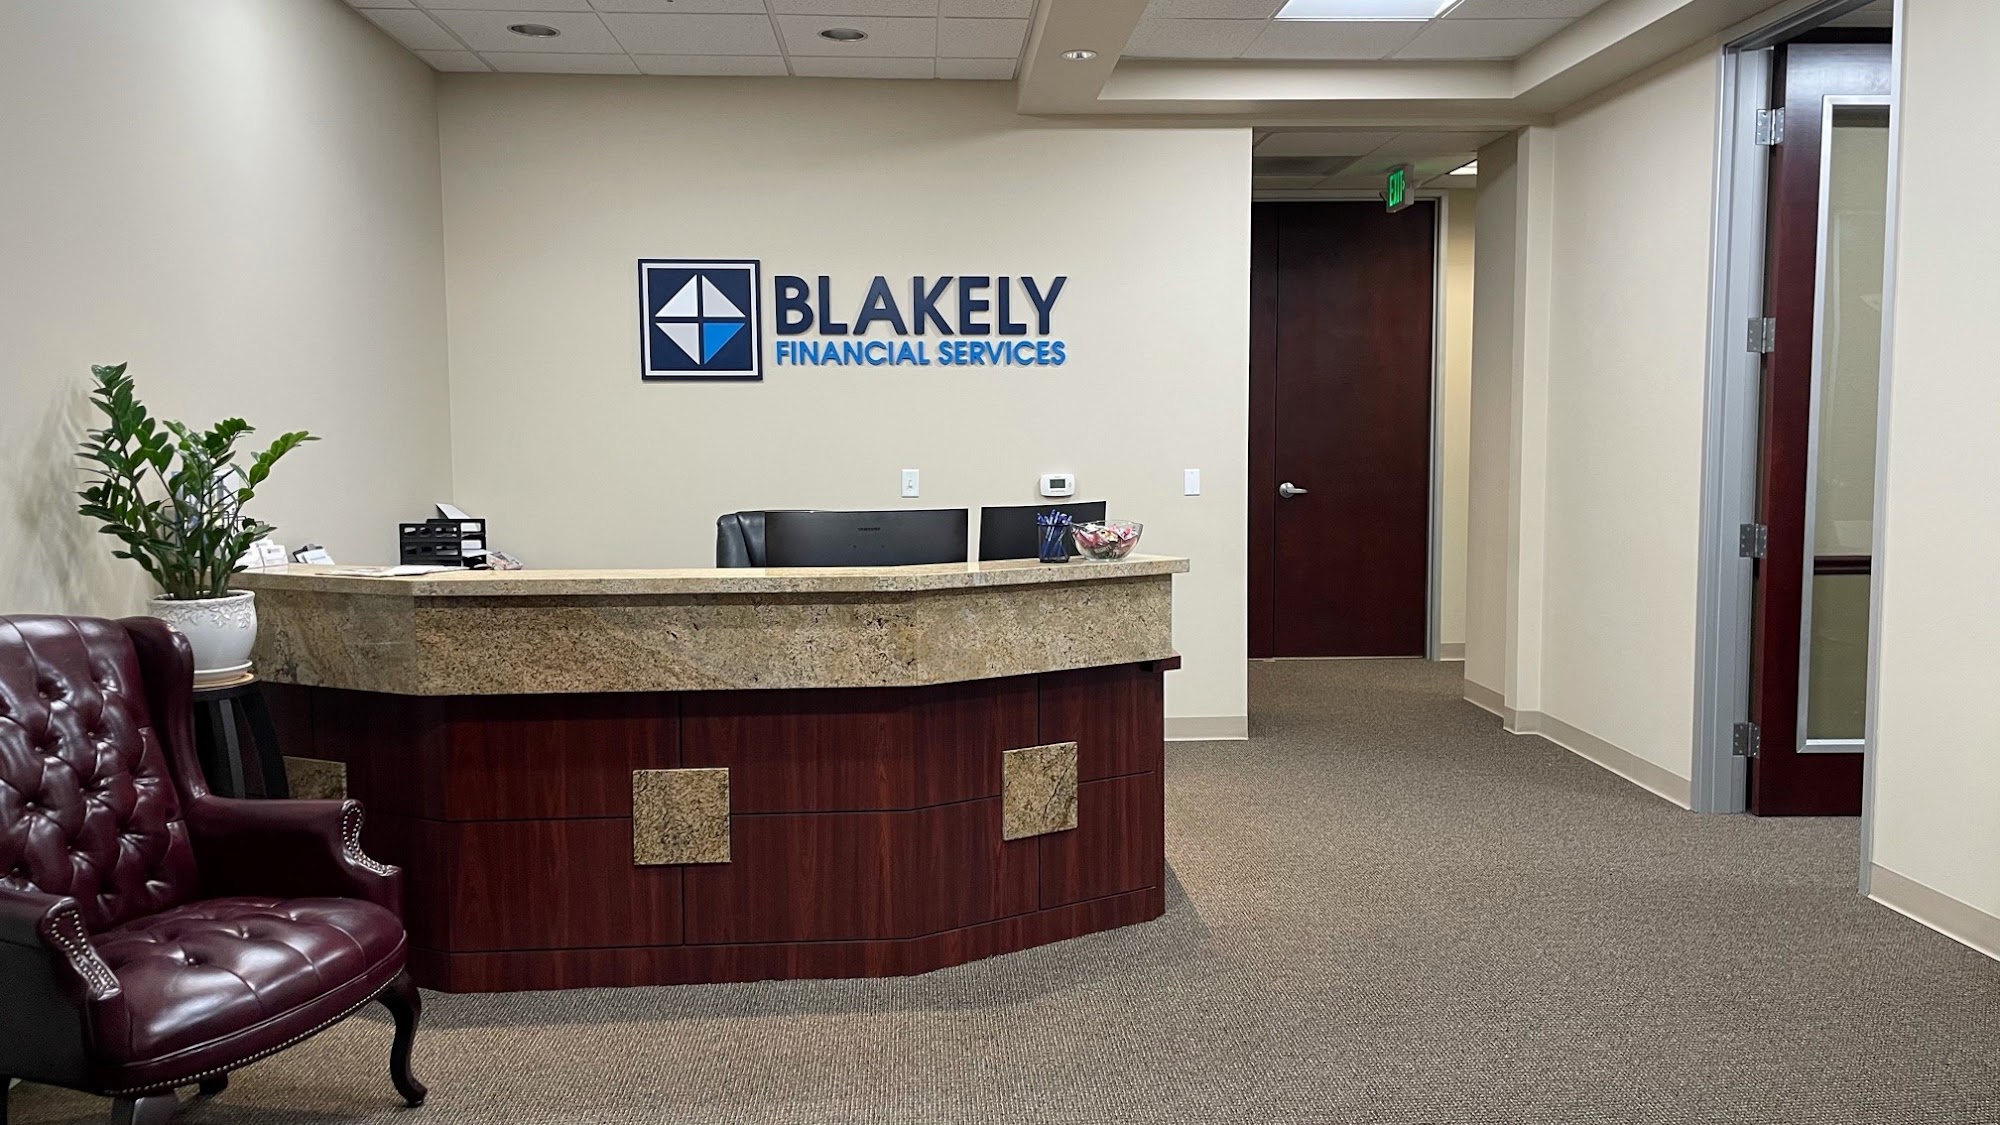 Blakely Financial Services